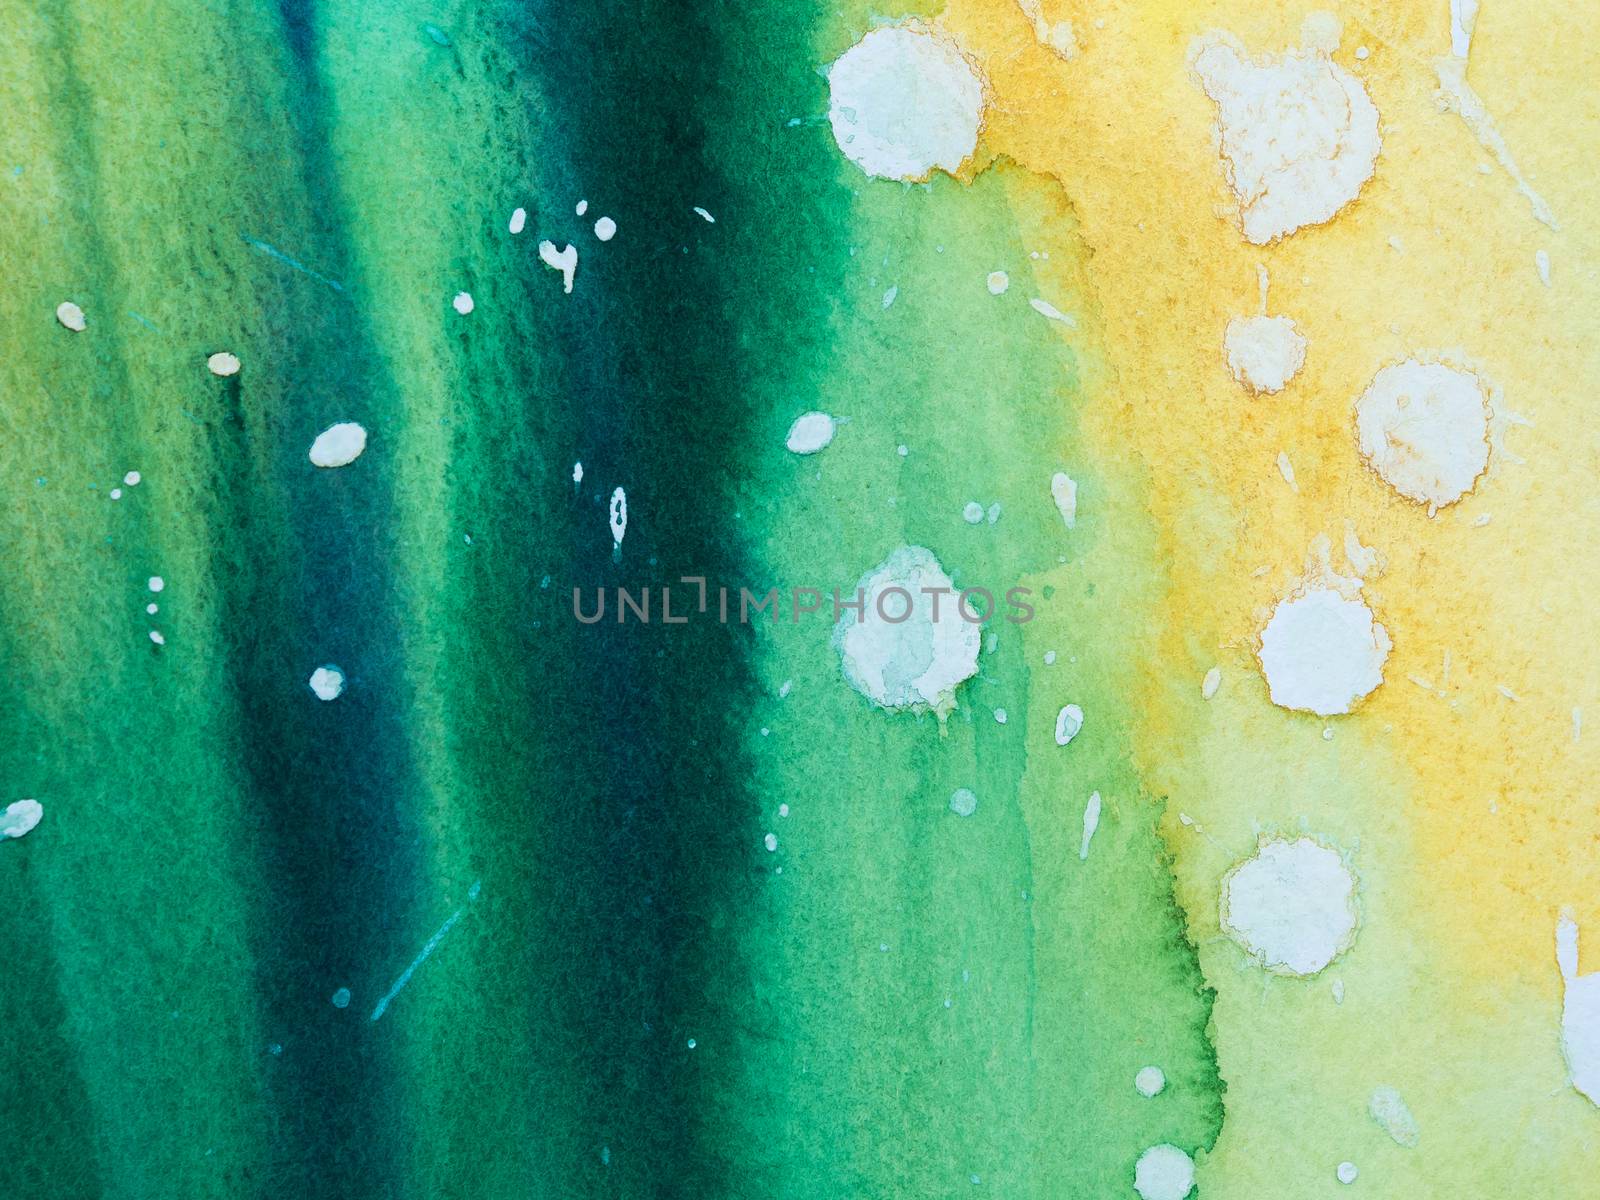 watercolor abstract image , use for background